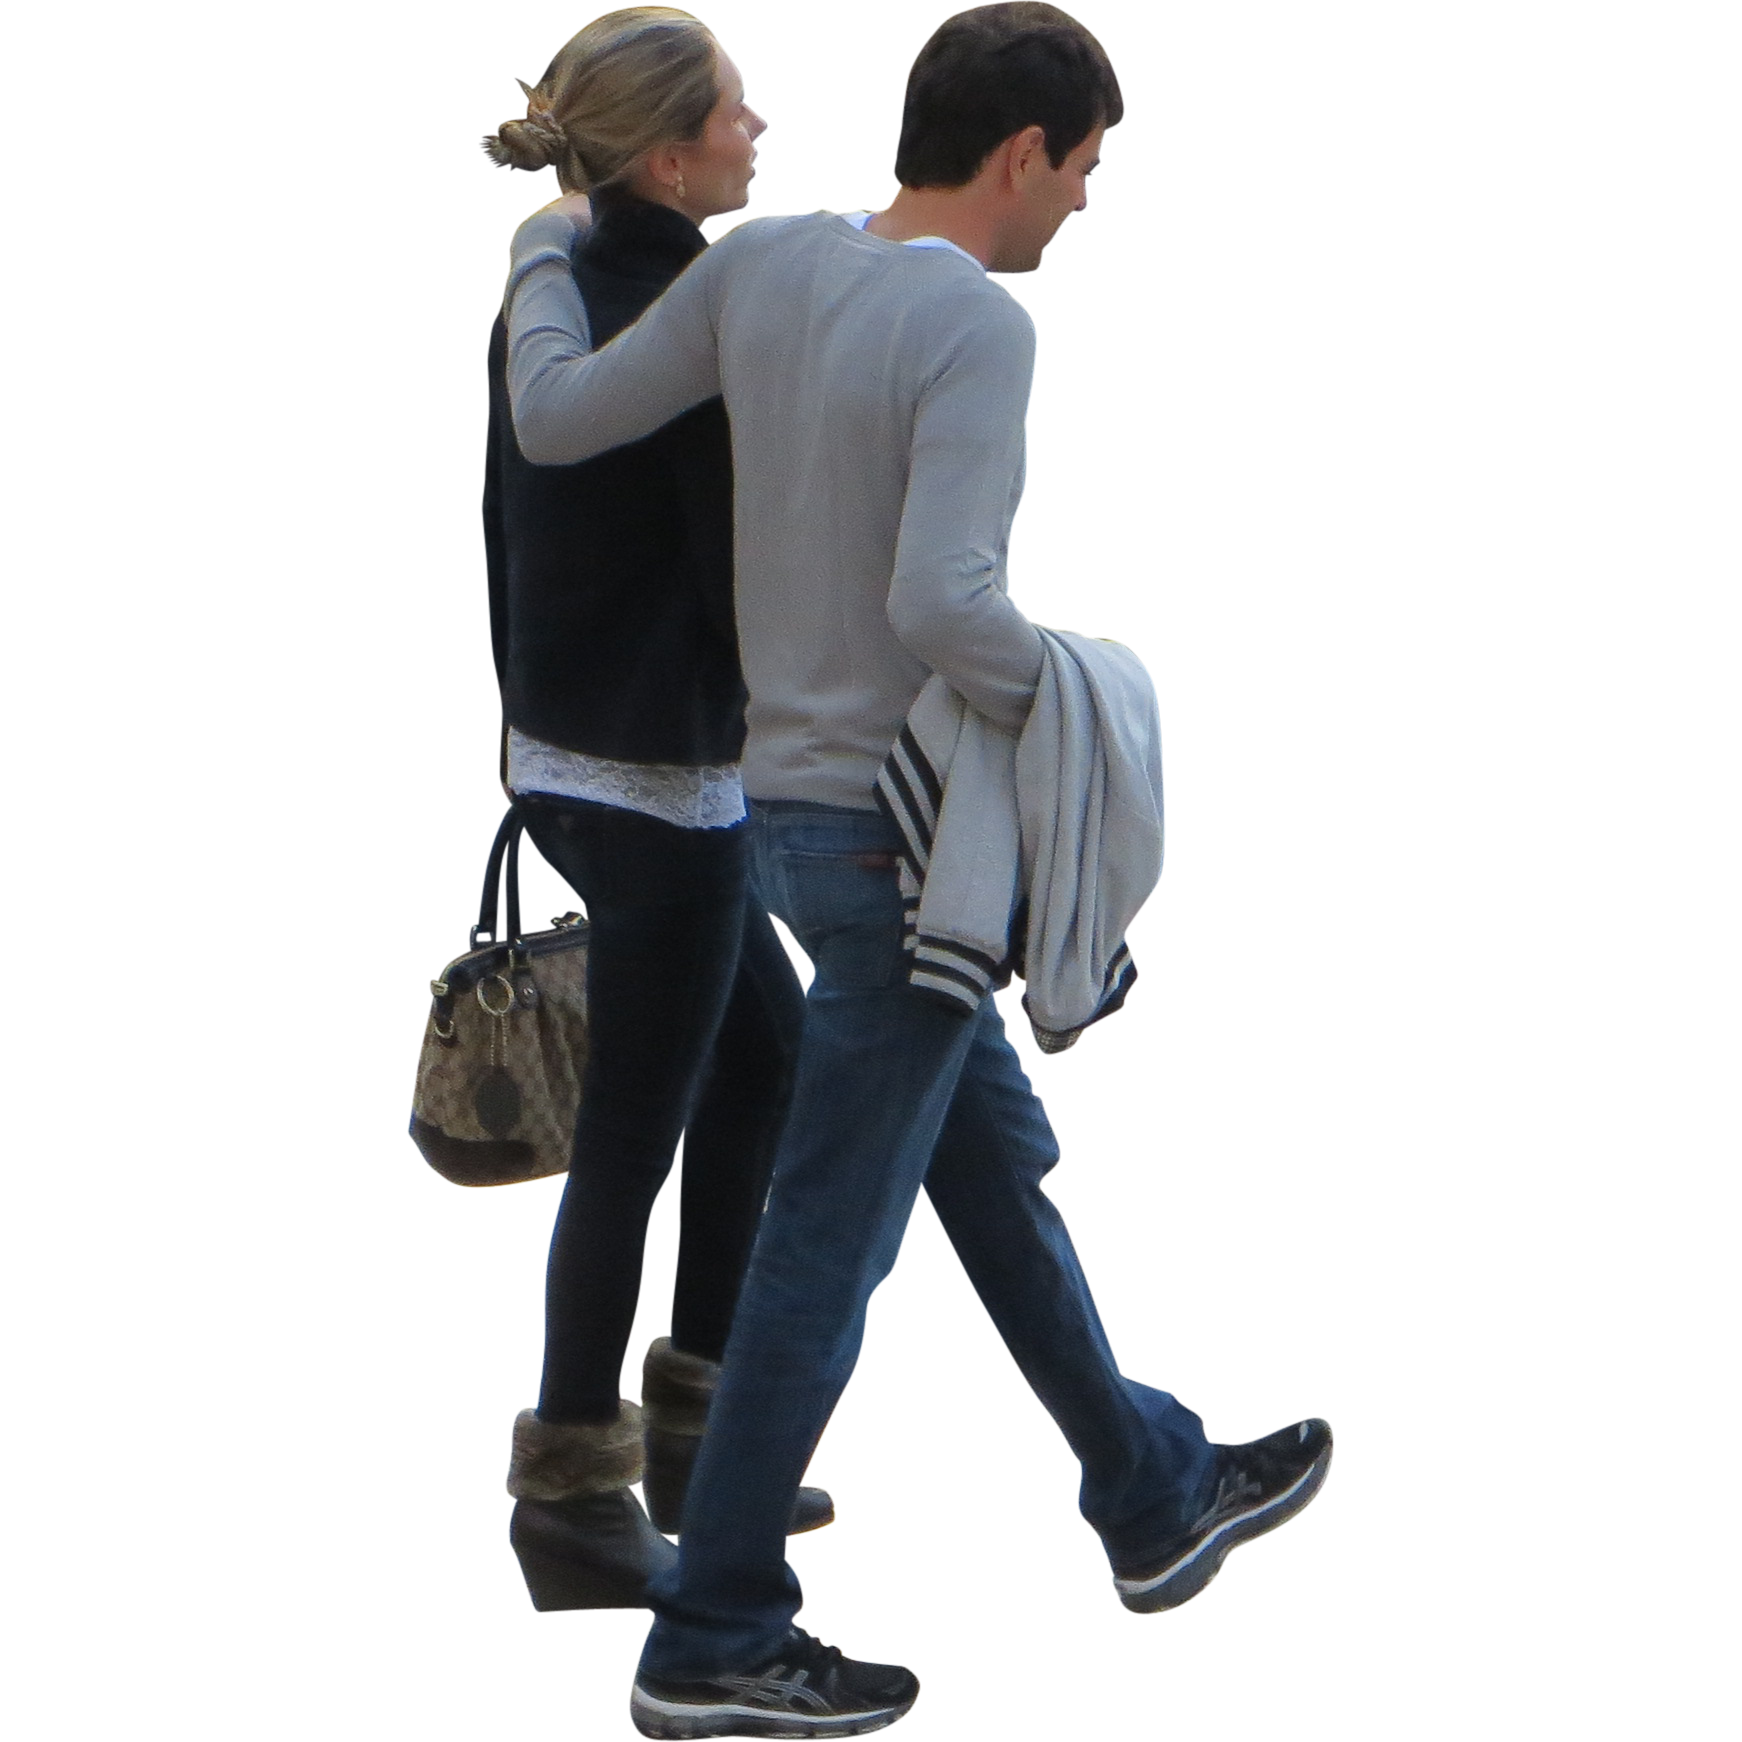 Walking couple people png #32494 - Free Icons and PNG Backgrounds